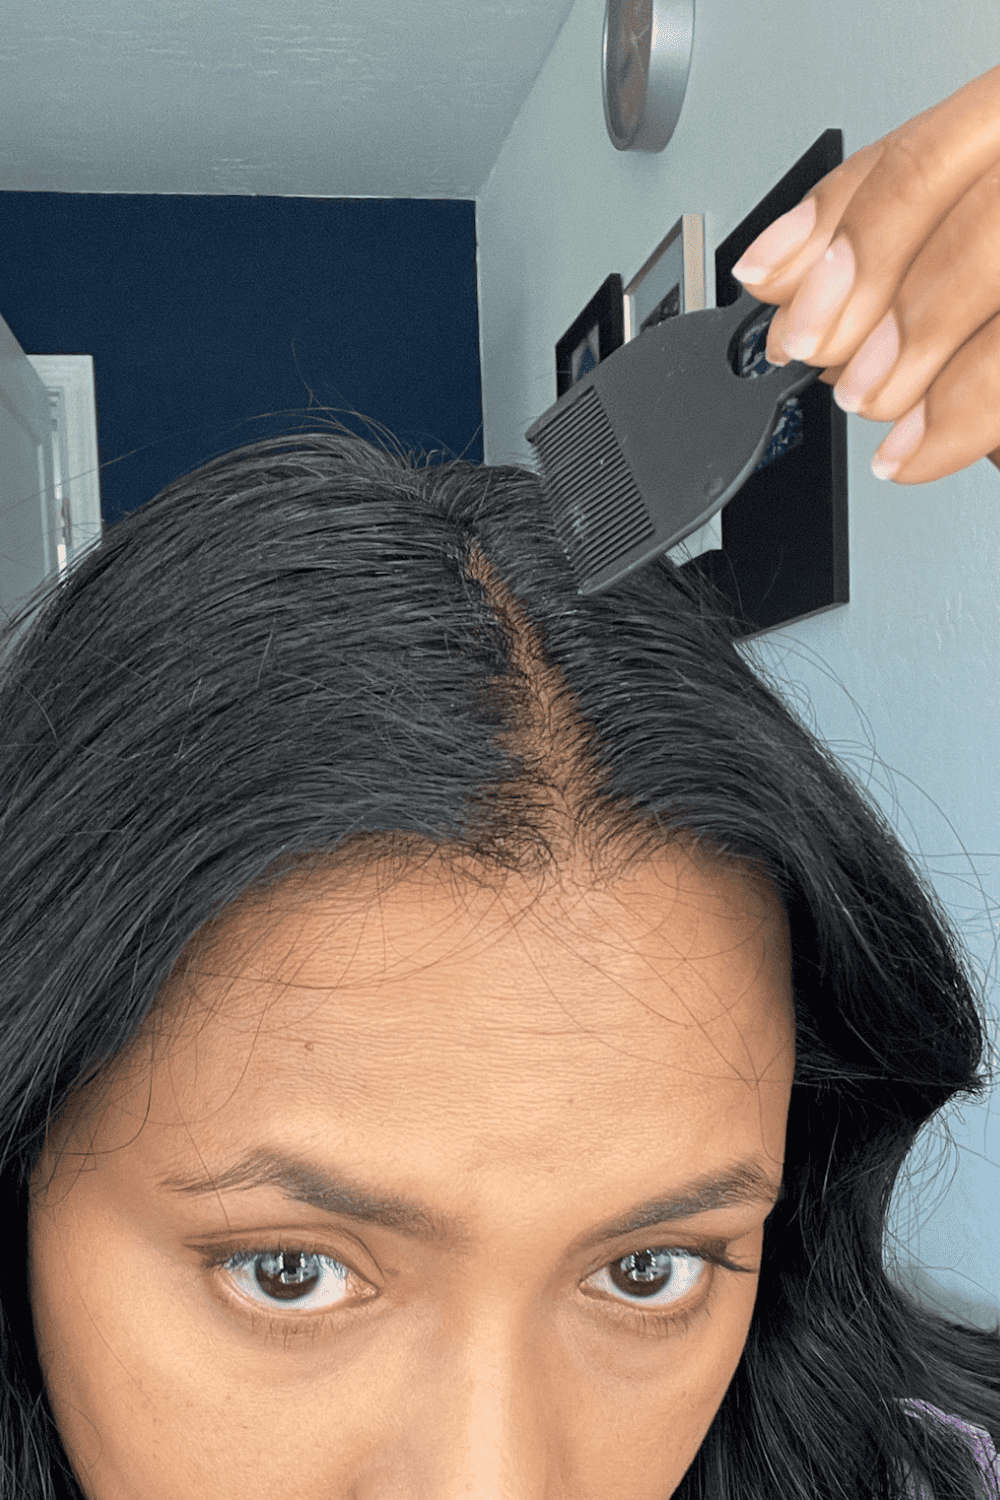 Combing the middle hair line